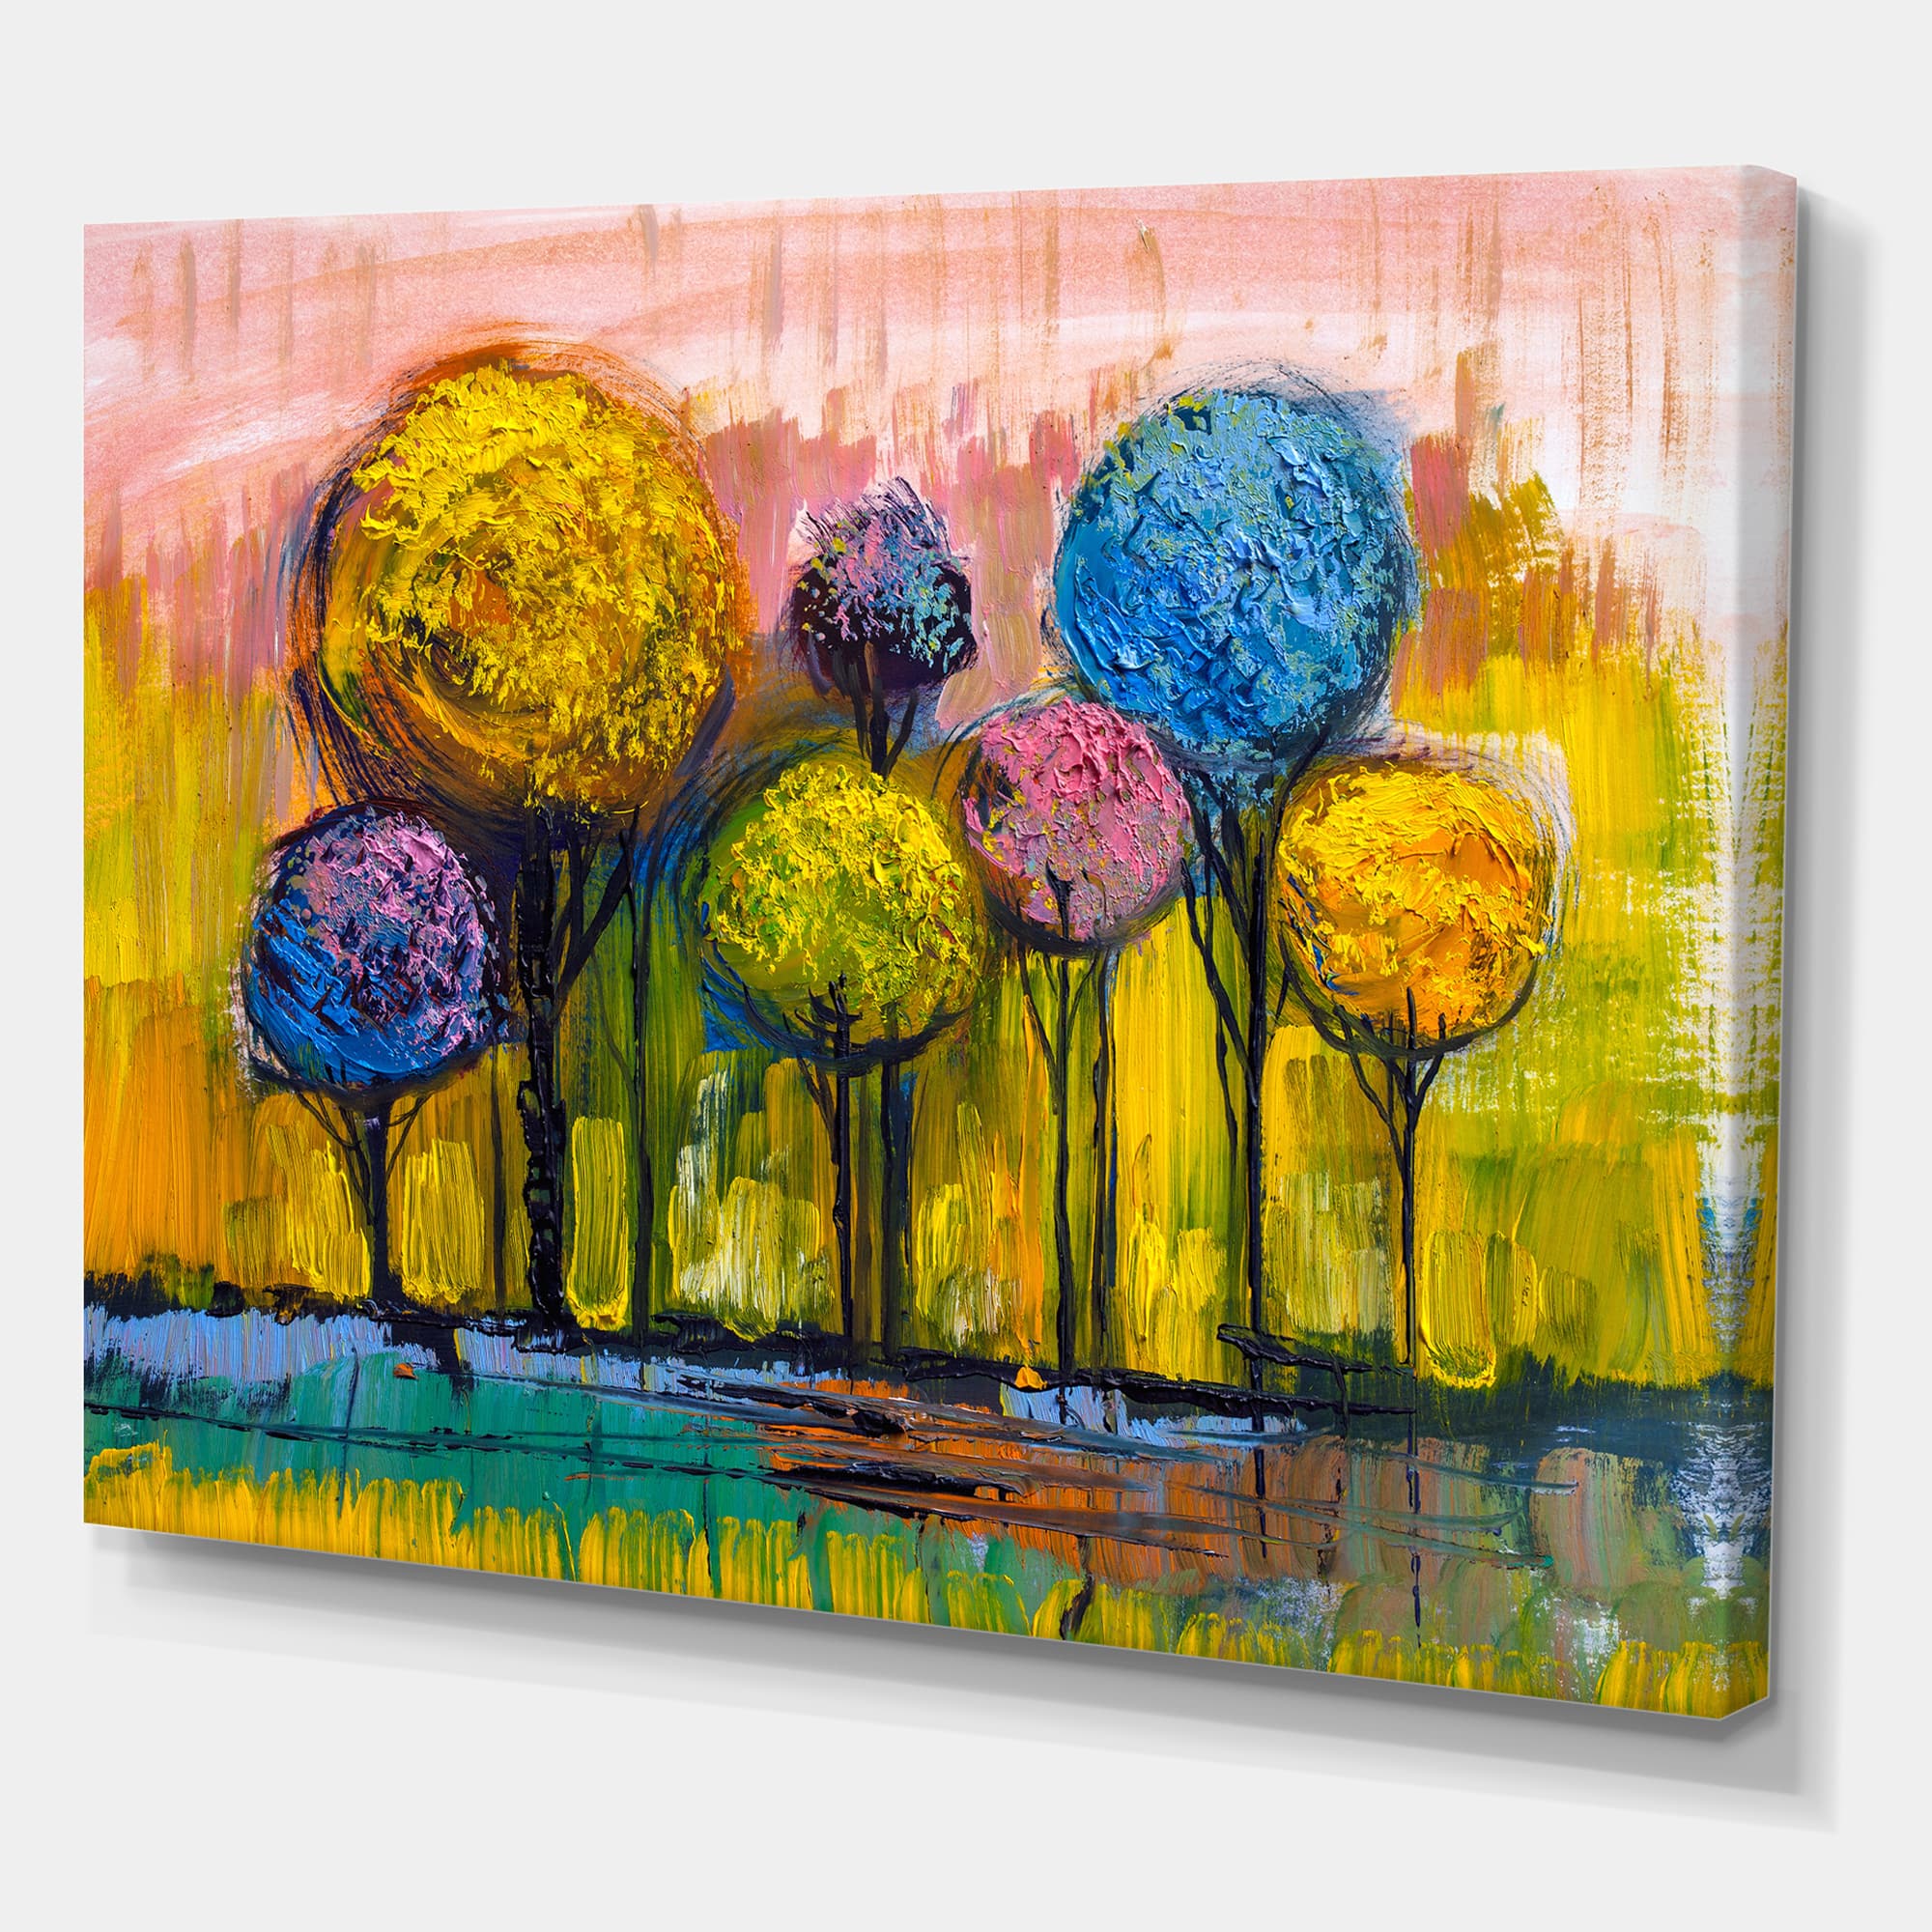 Abstract Wall Painting on Canvas,colourful Tree Painting,palette